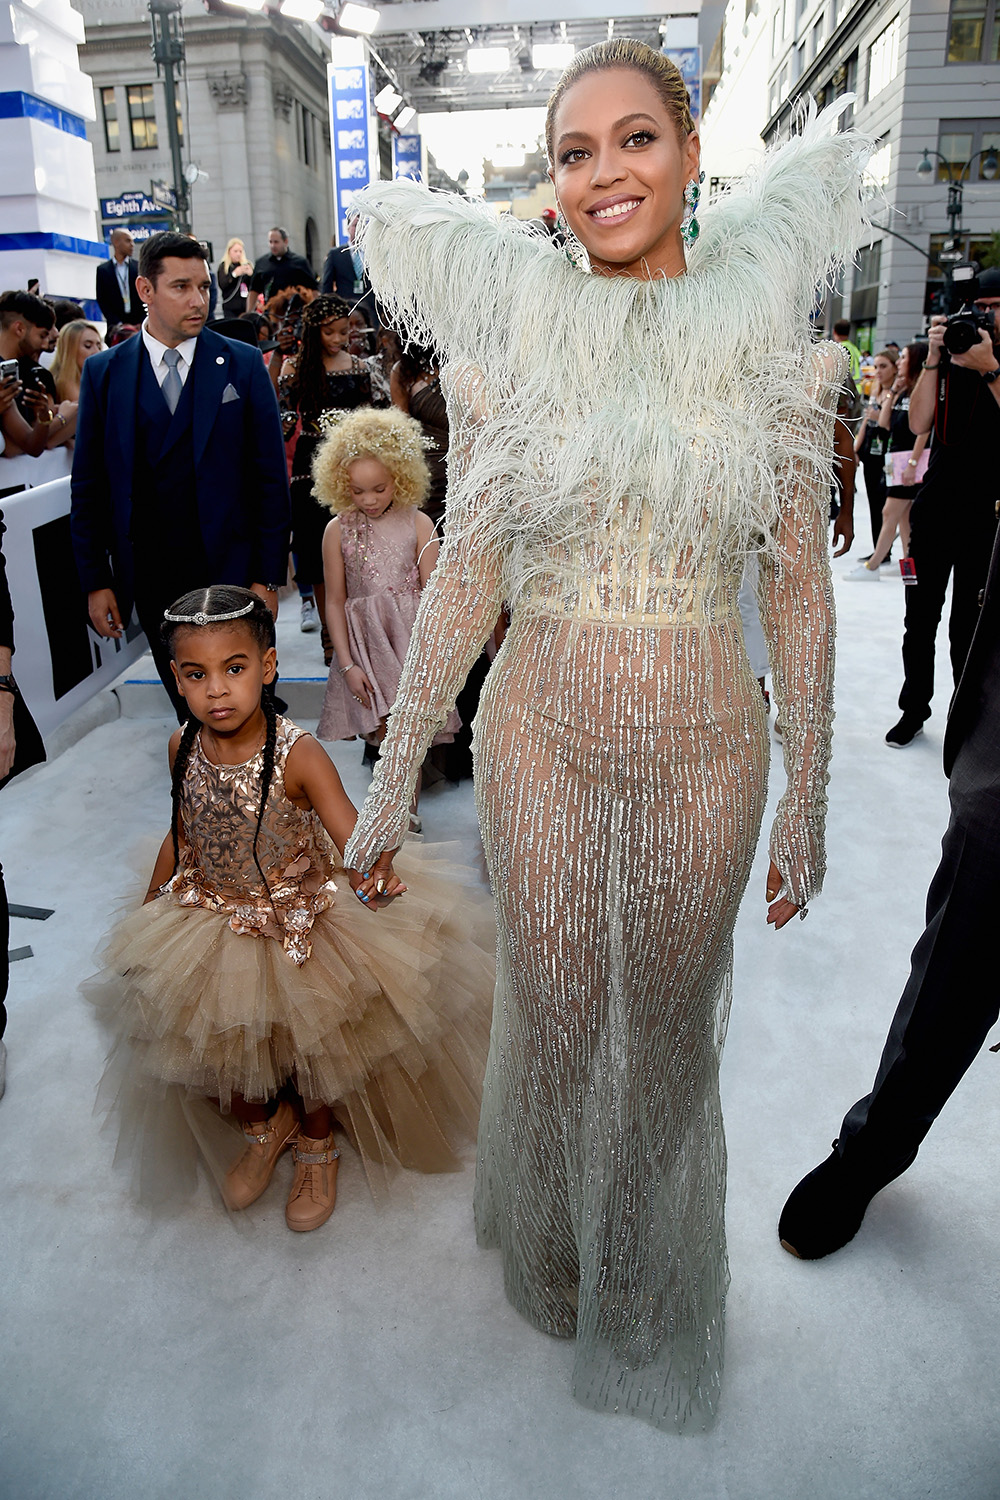 Beyonce and Blue Ivy Carter at MTV Video Music Awards.